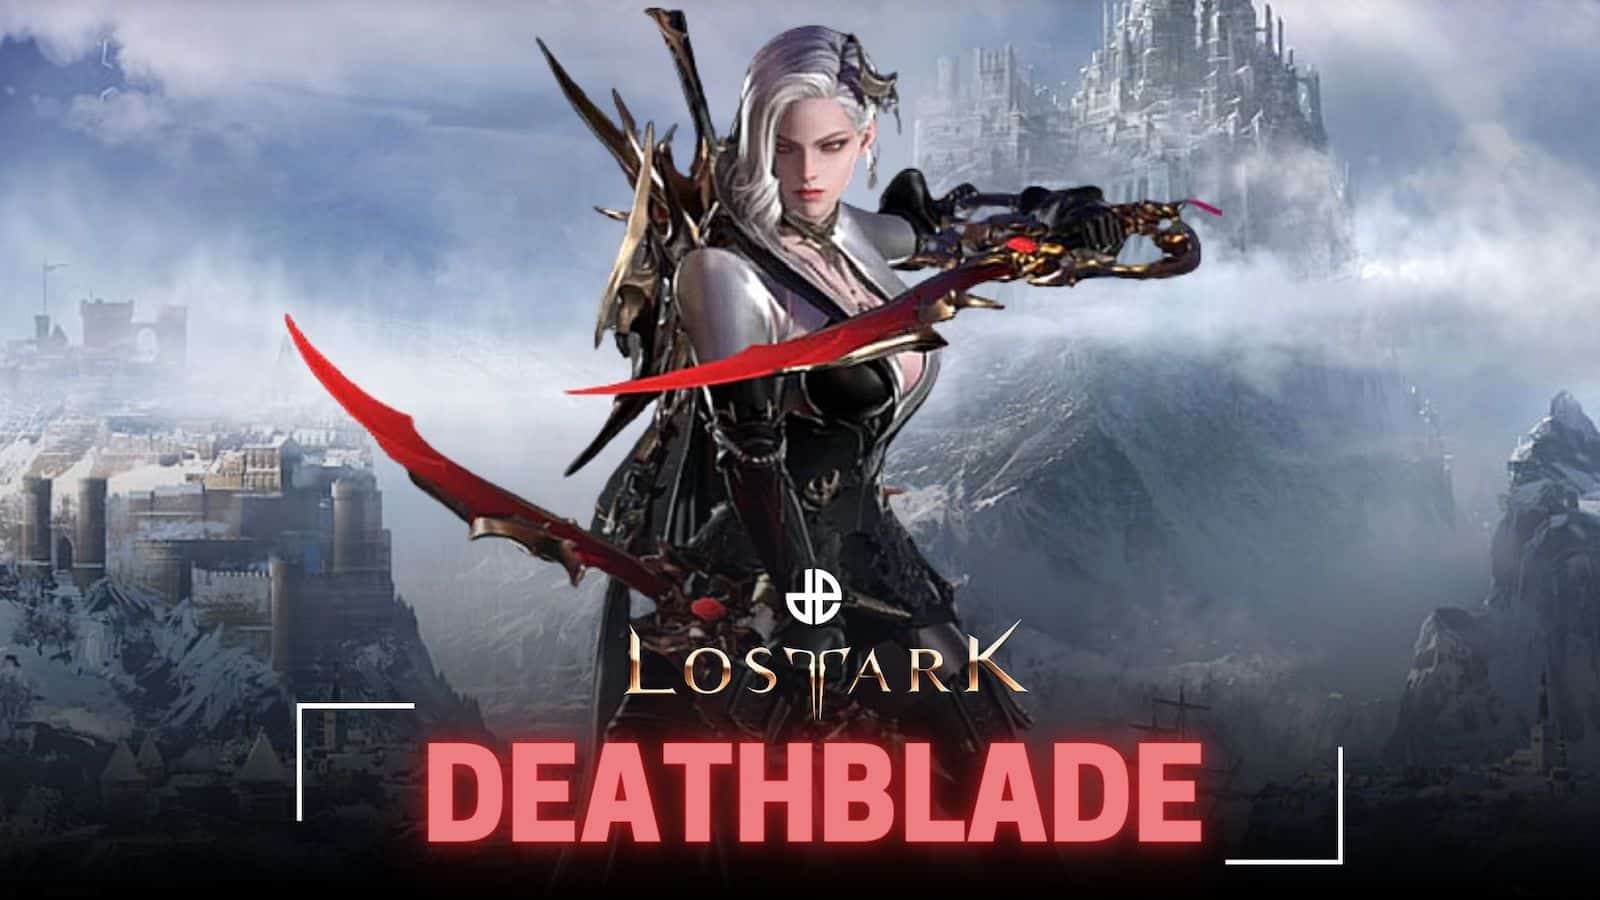 Best Lost Ark Deathblade builds for PvE and PvP